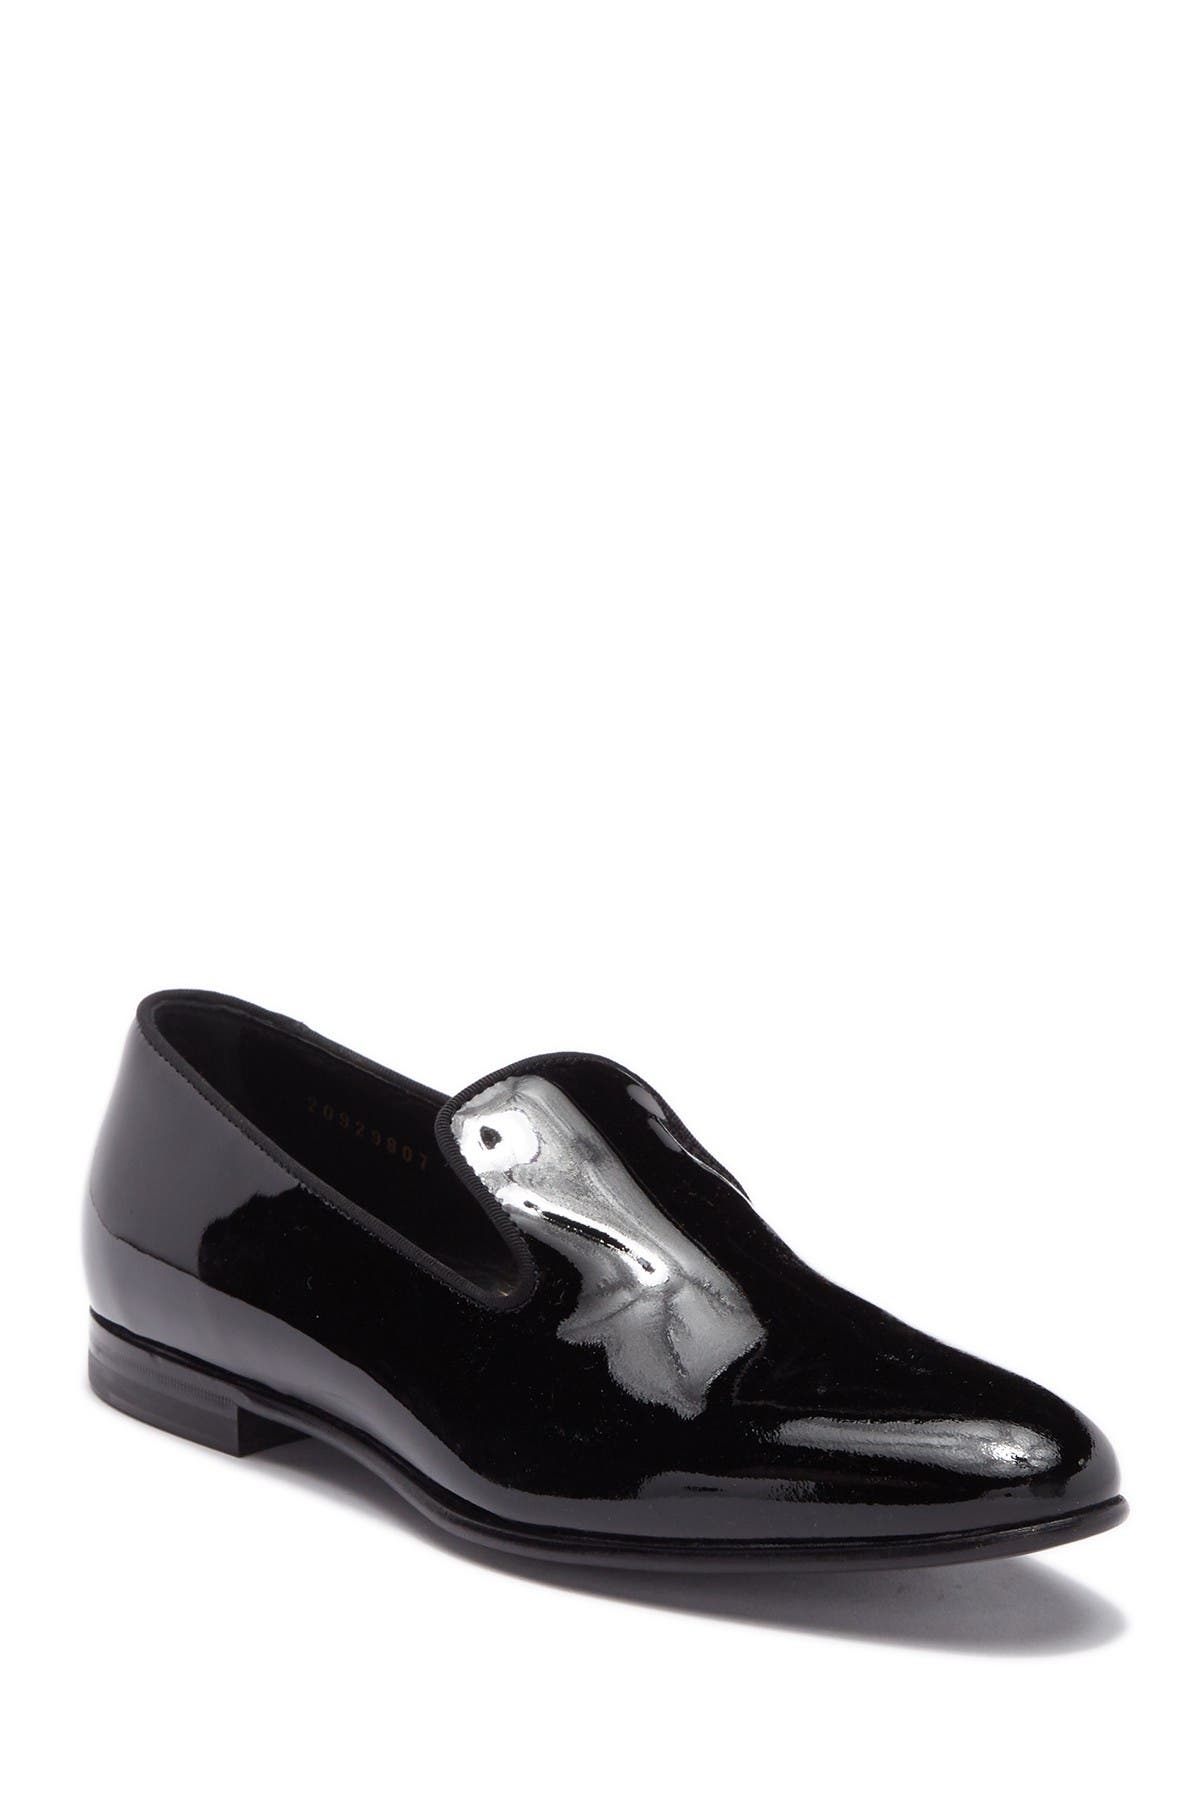 BOSS | Notched Patent Leather Loafer 